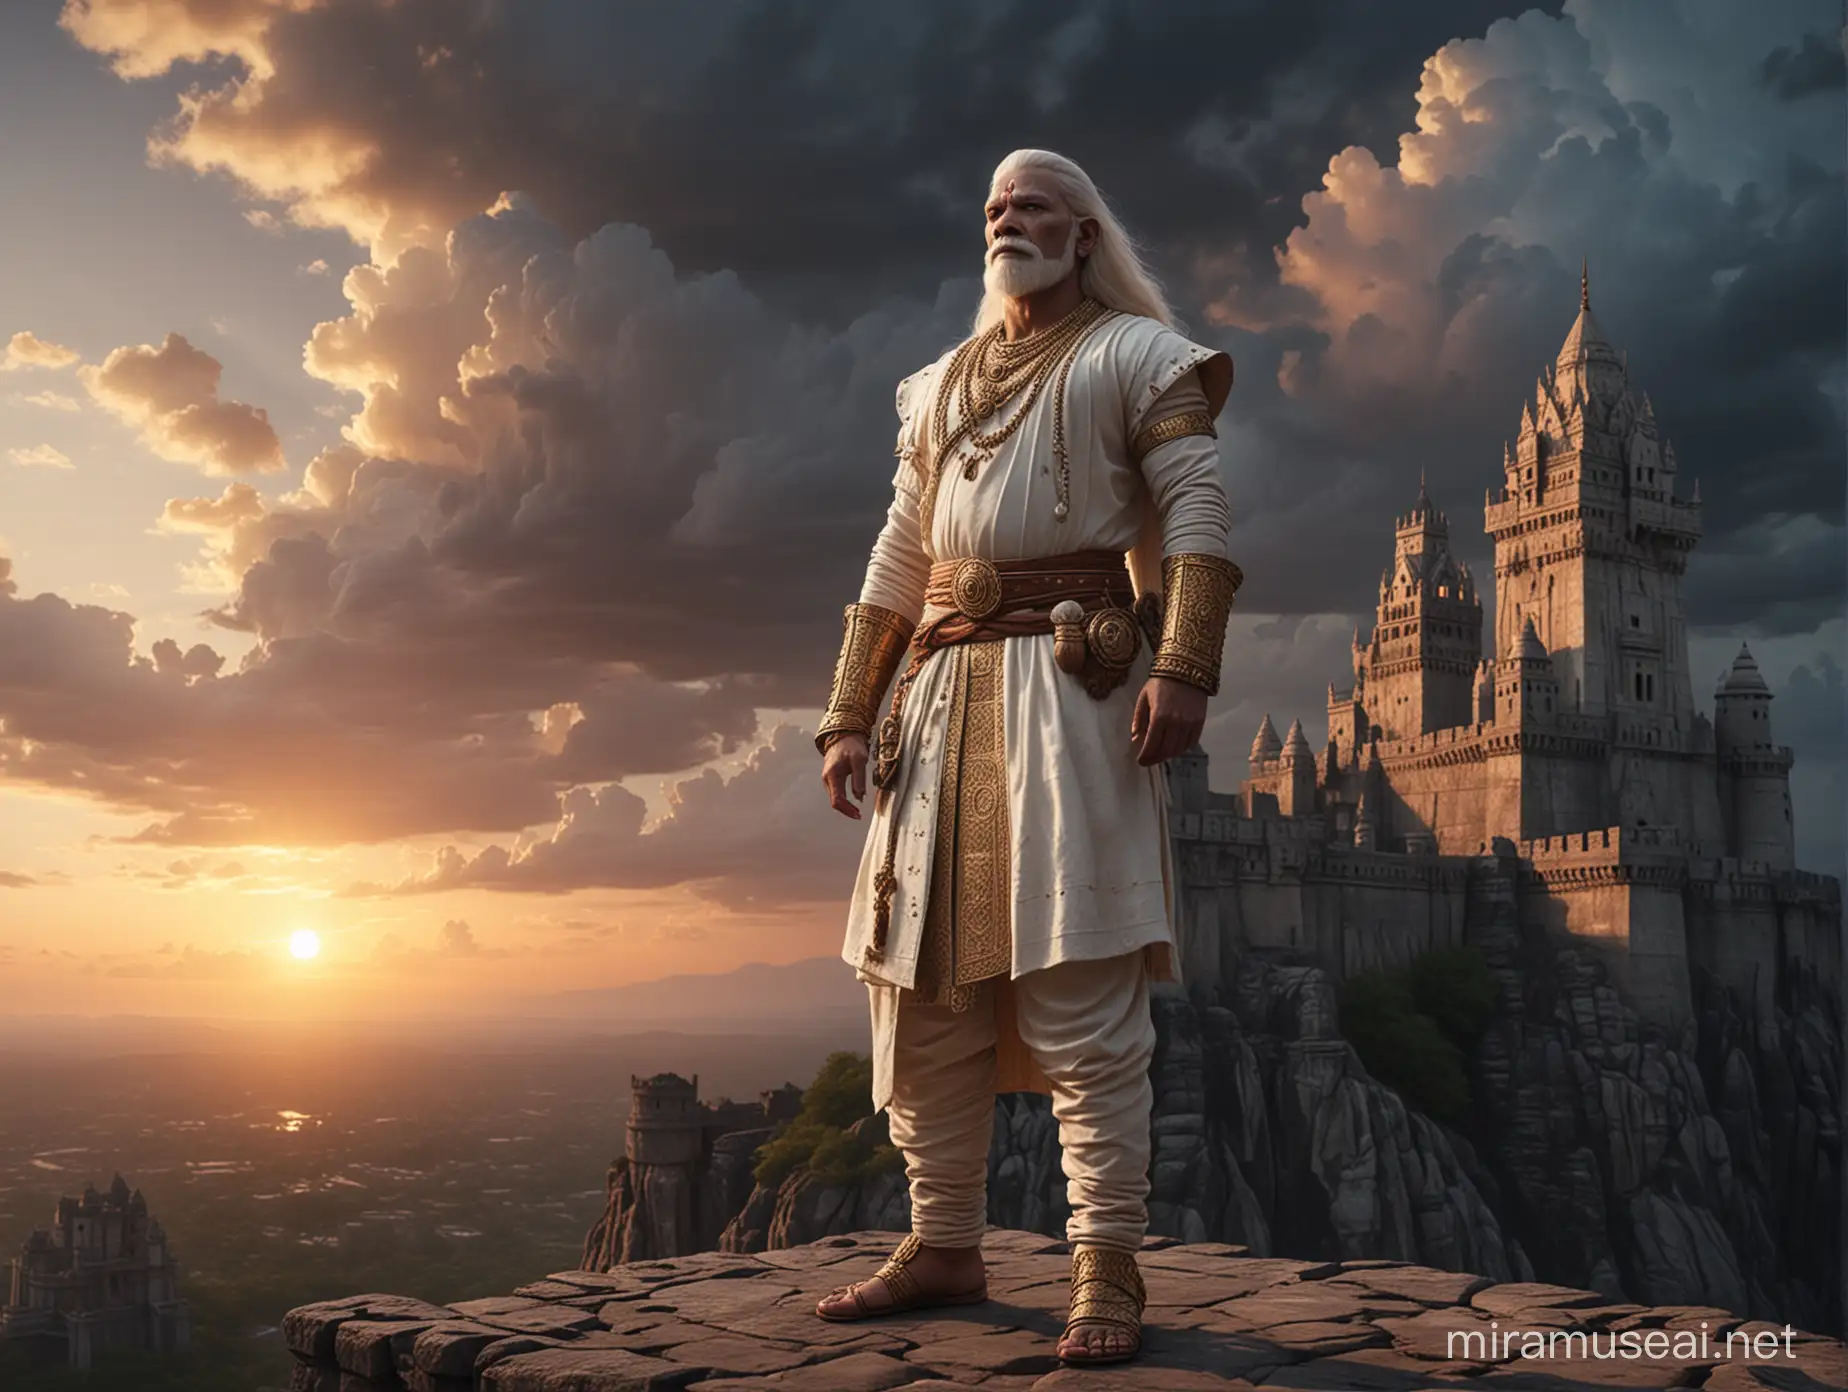 Albino King in Ancient Indian Castle at Sunset